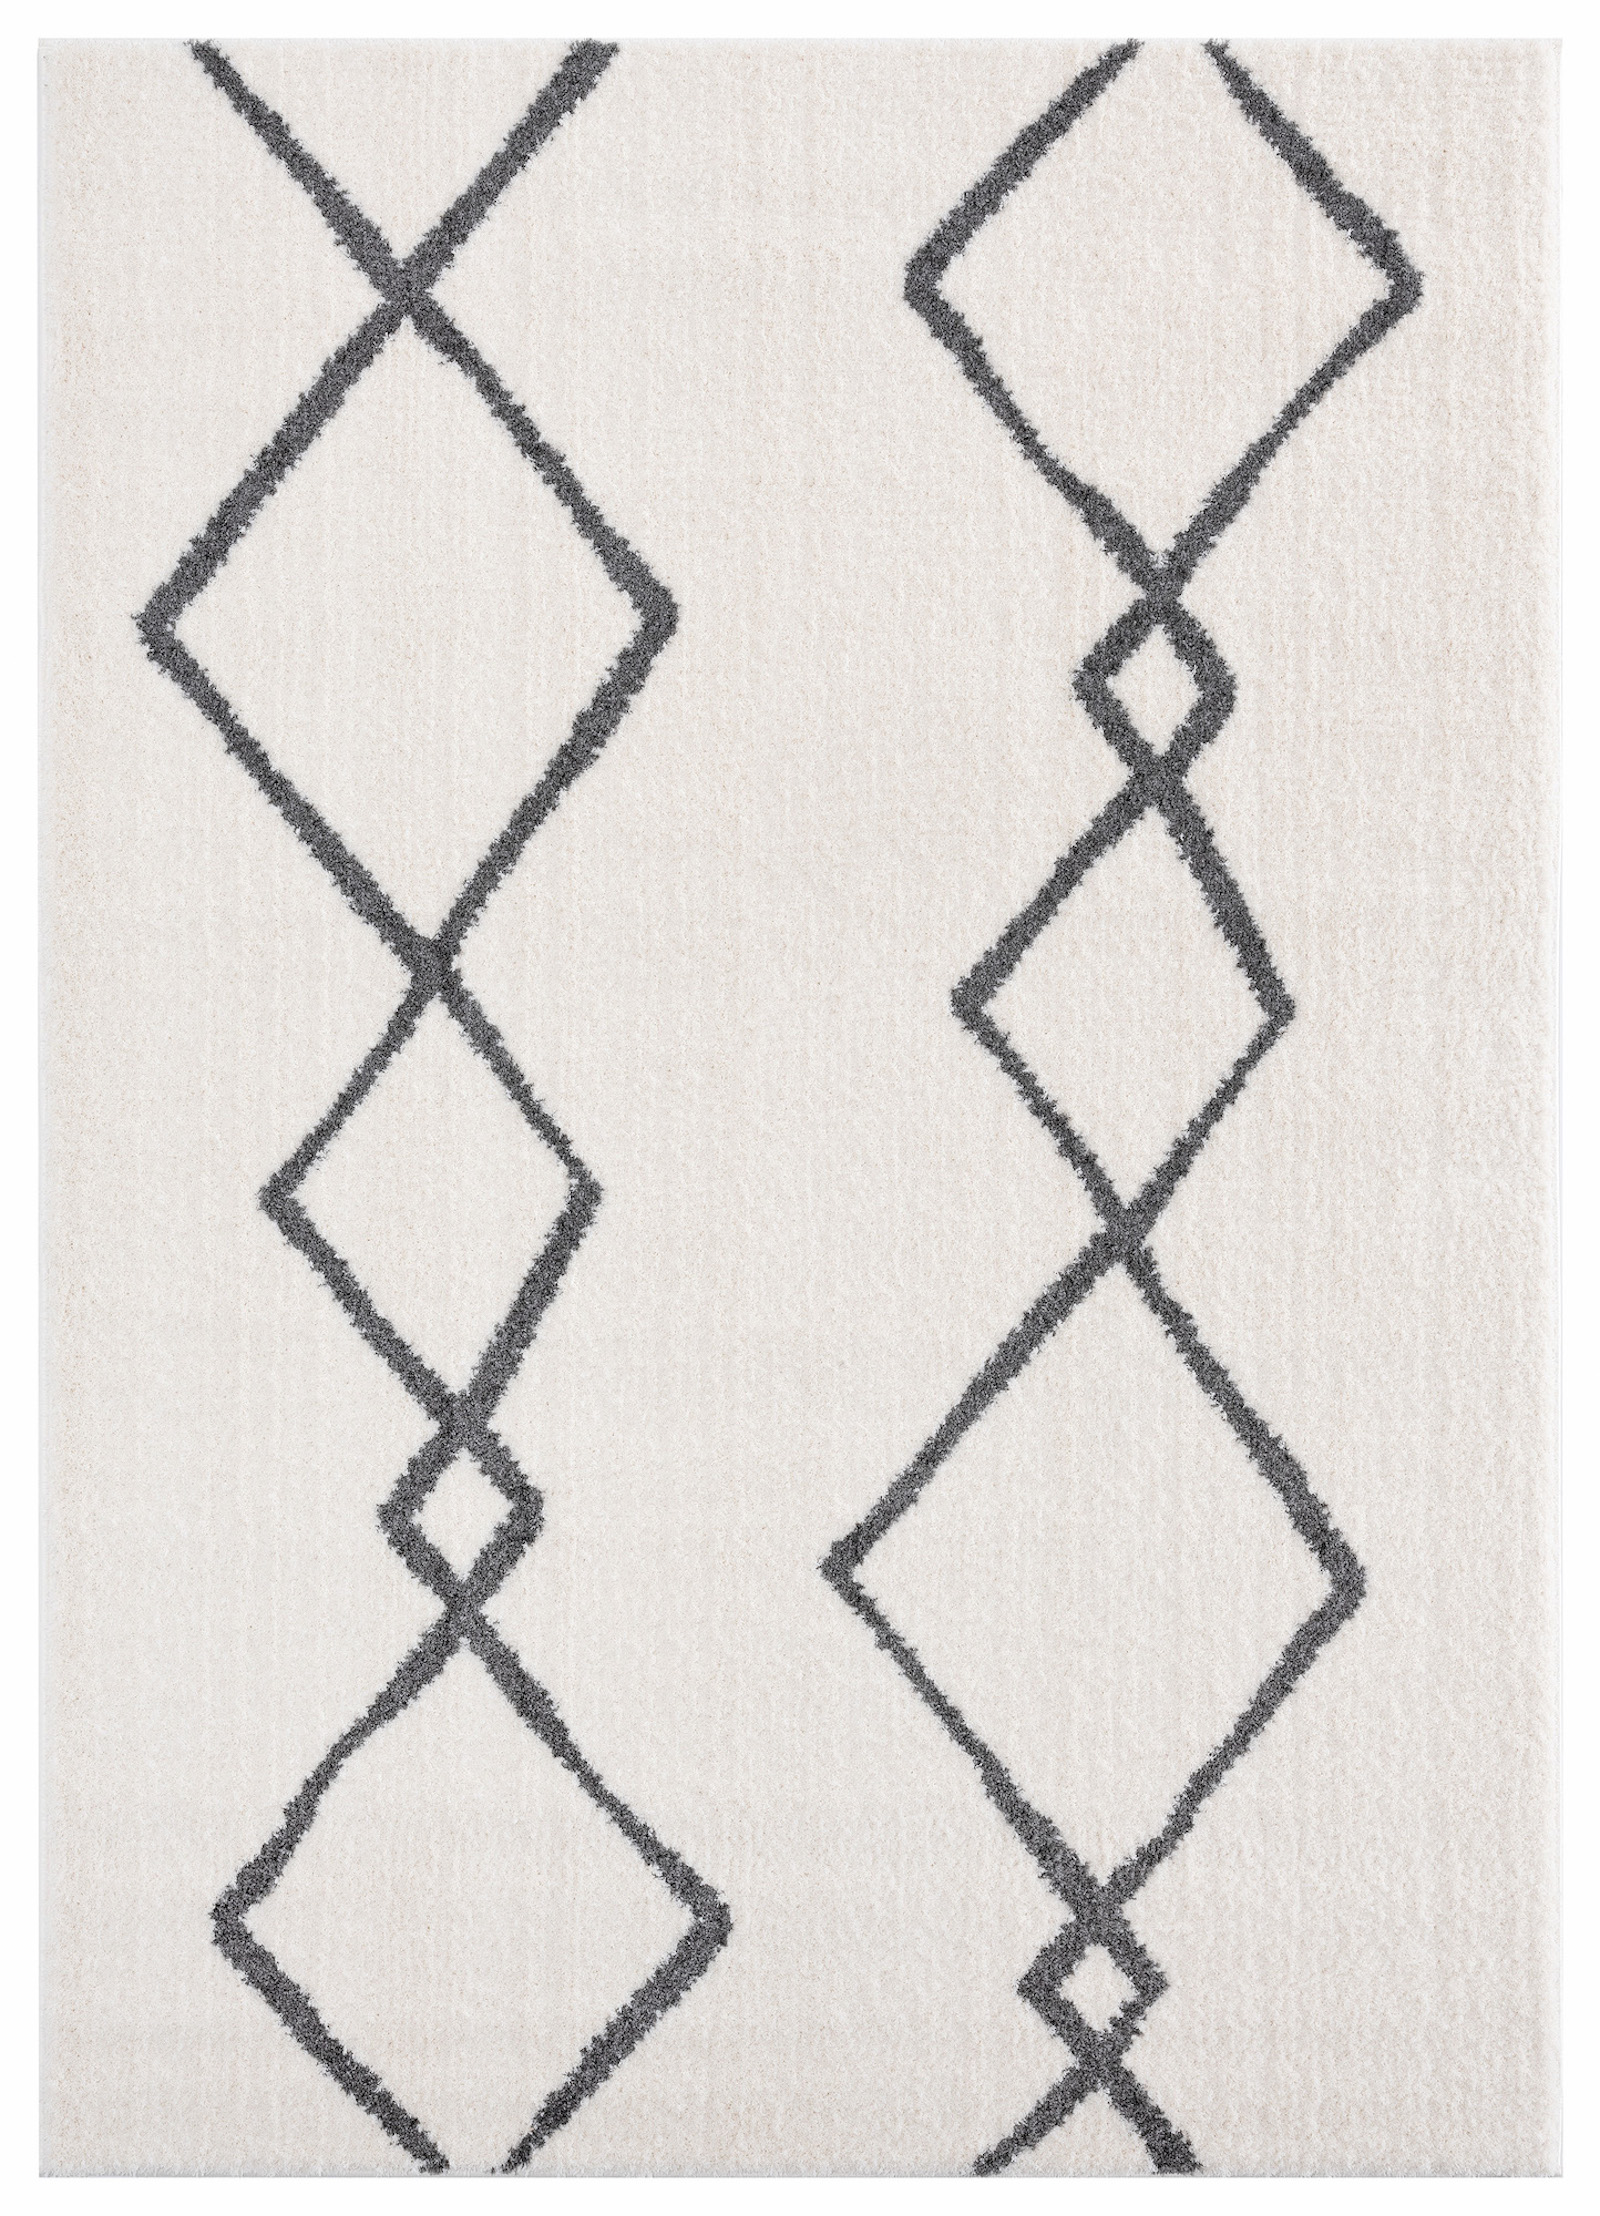 United Weavers of America Tranquility Casimir White Area Rug